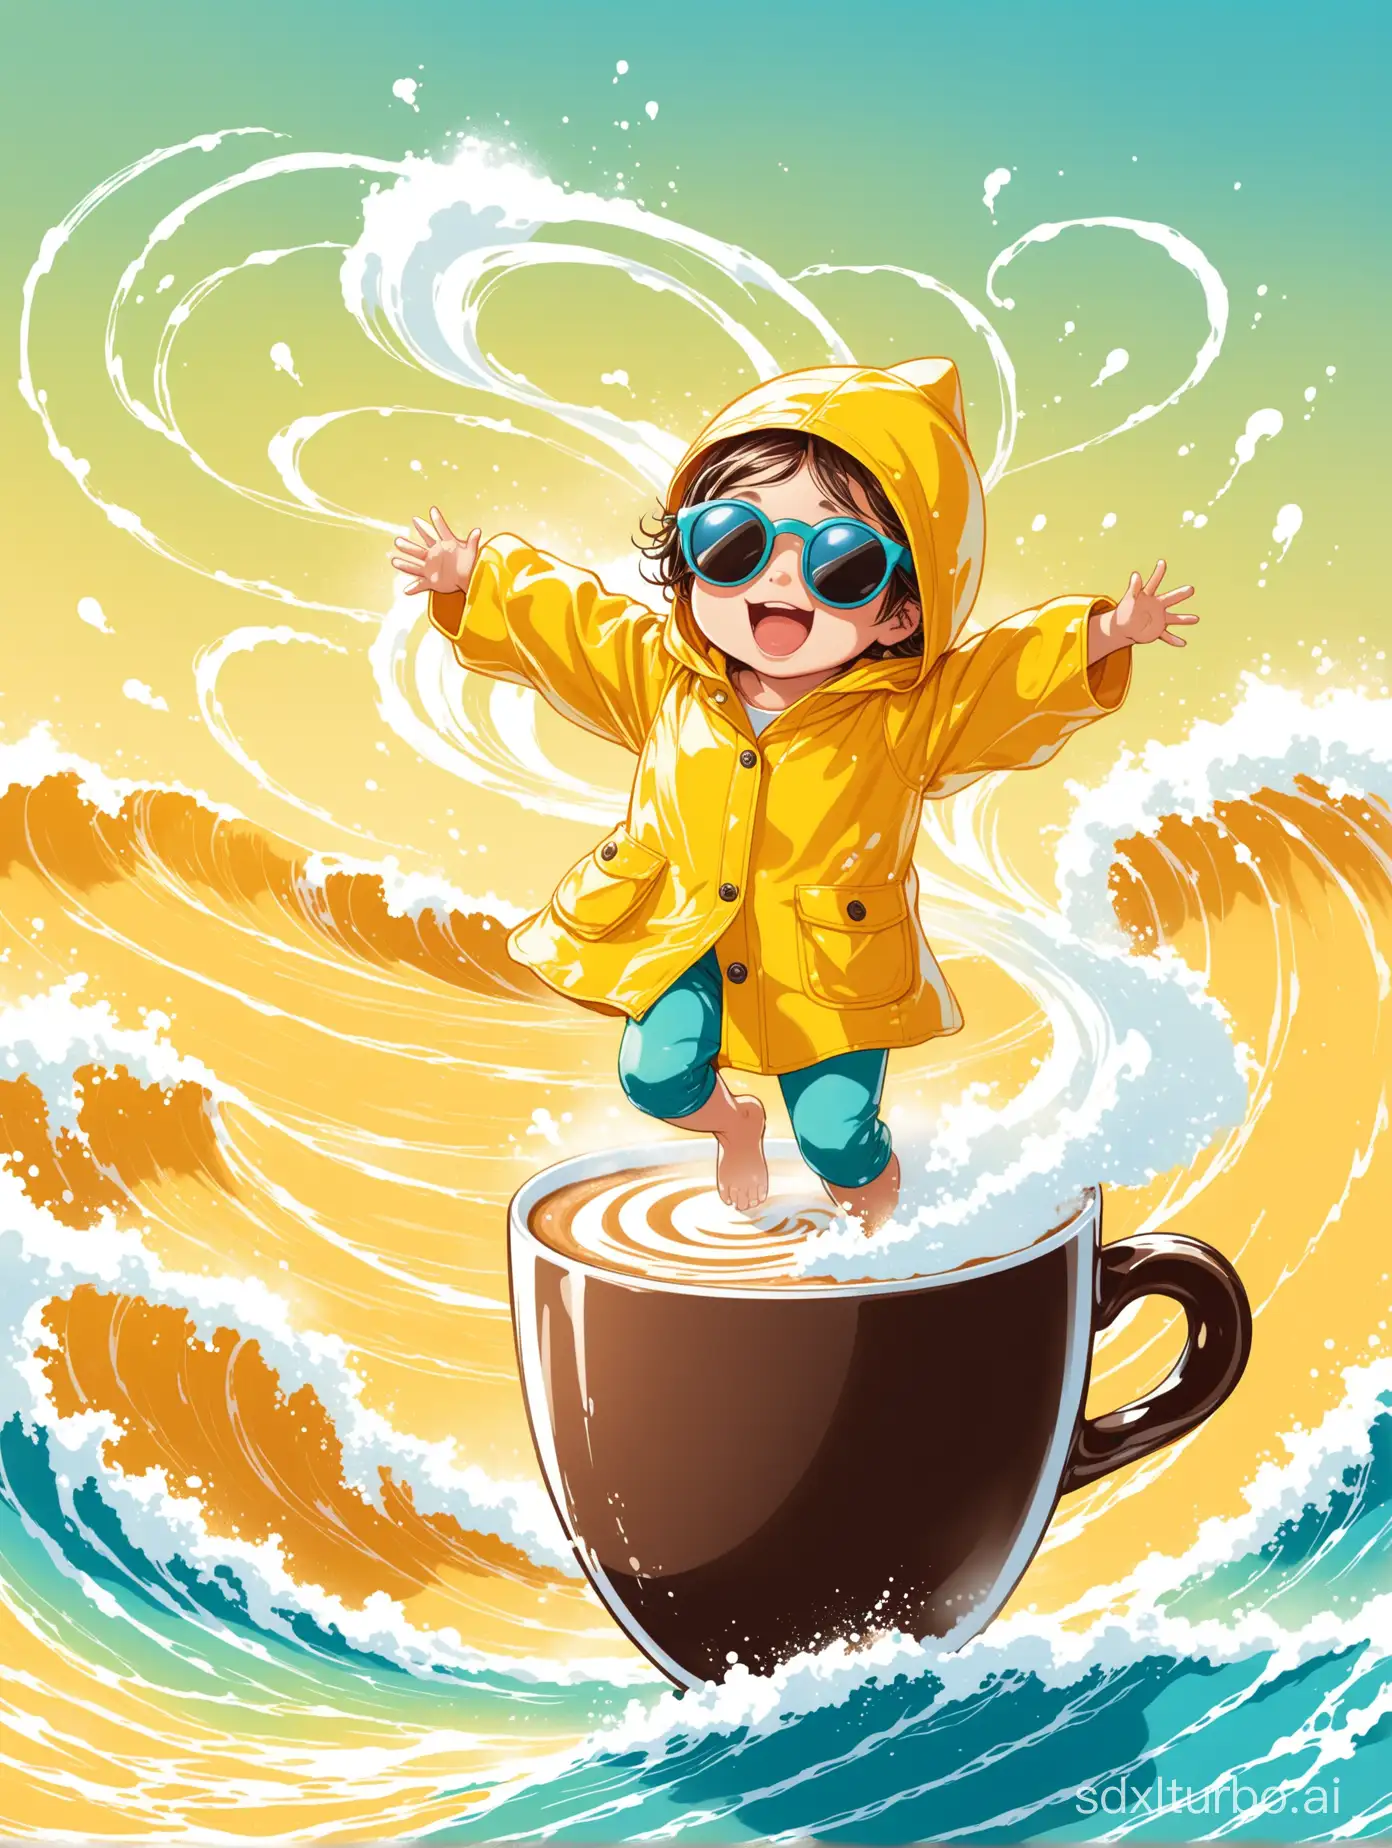 Joyful-Child-Surfing-on-Giant-Espresso-Cup-in-Bright-Yellow-Raincoat